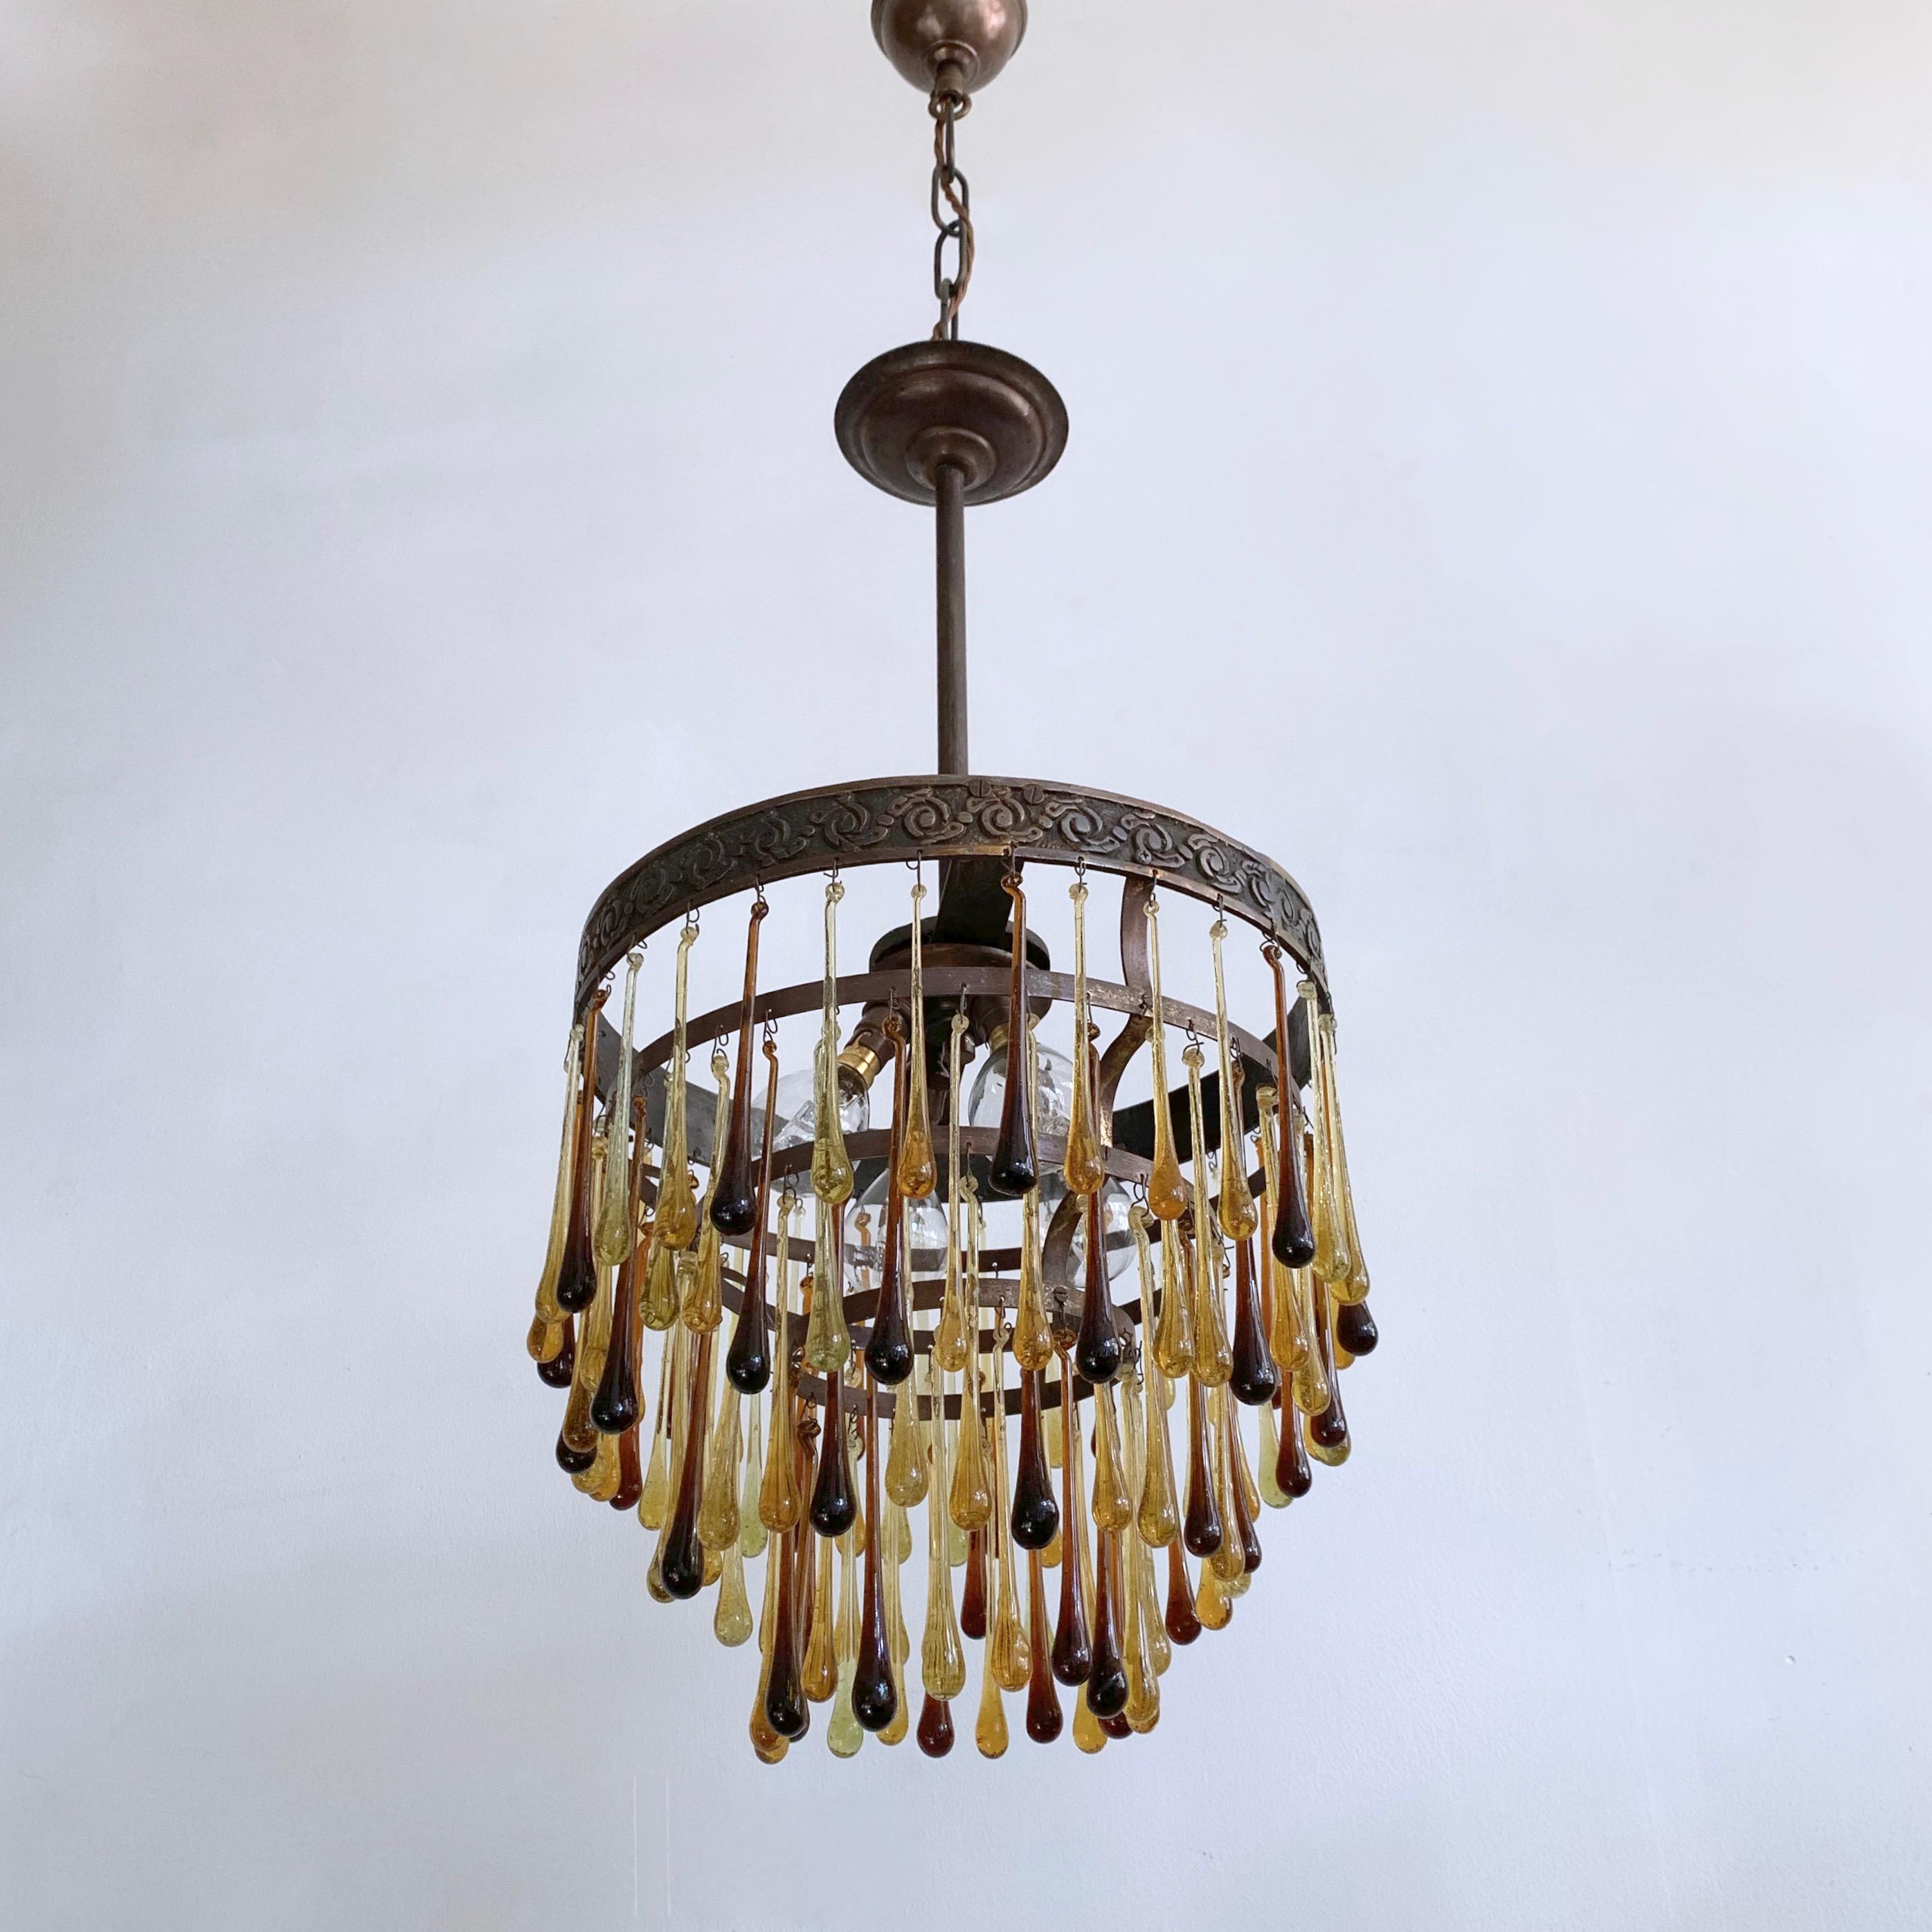 Small waterfall chandelier dressed in striking brown and amber glass teardrops. The glass droplets are a mixture of modern and vintage. The brass chandelier frame is French early 1900s and has been customized with these drops. This light would